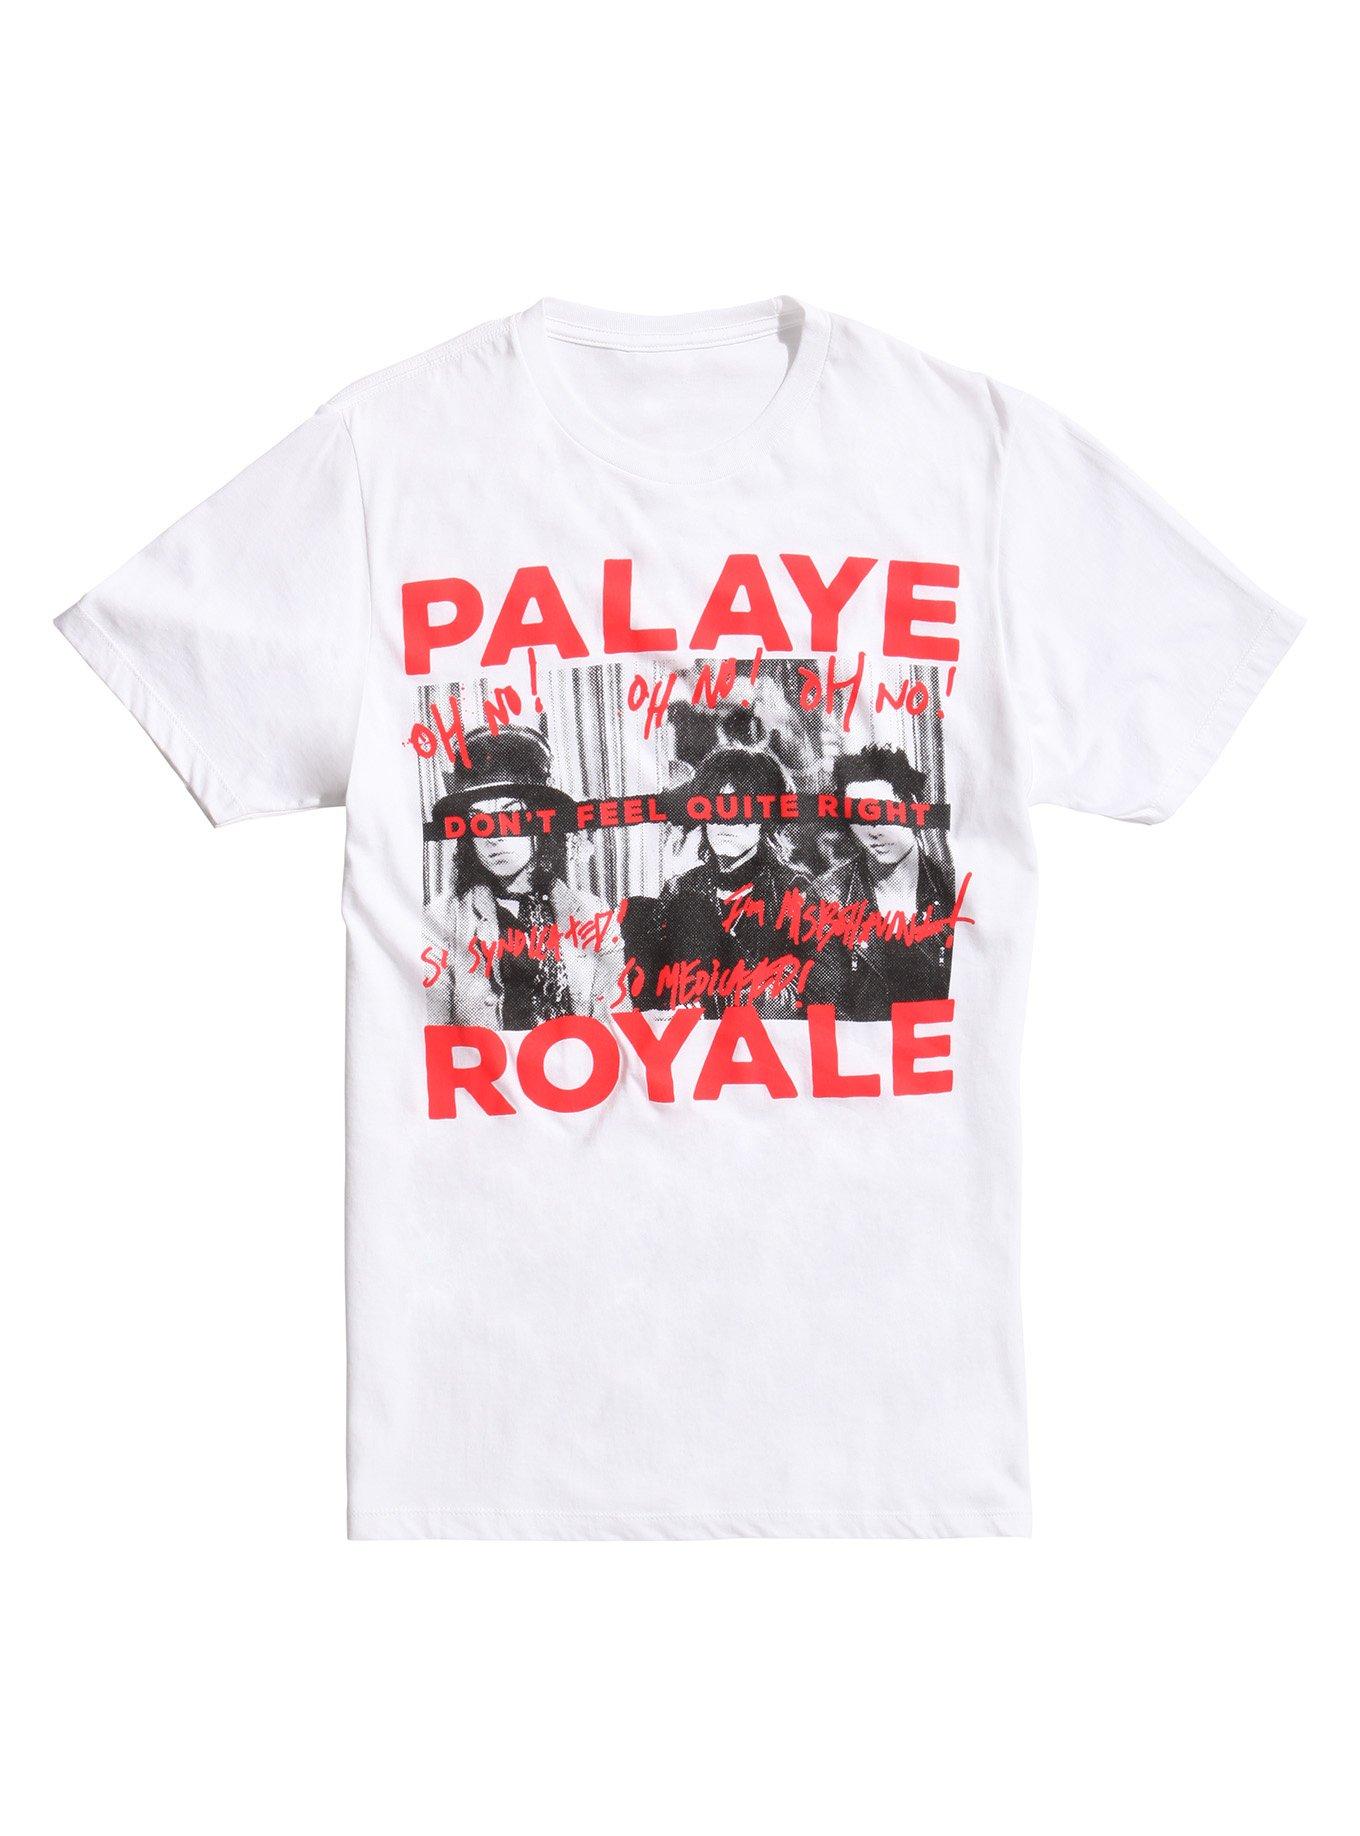 Palaye Royale Don't Feel Quite Right T-Shirt, WHITE, hi-res